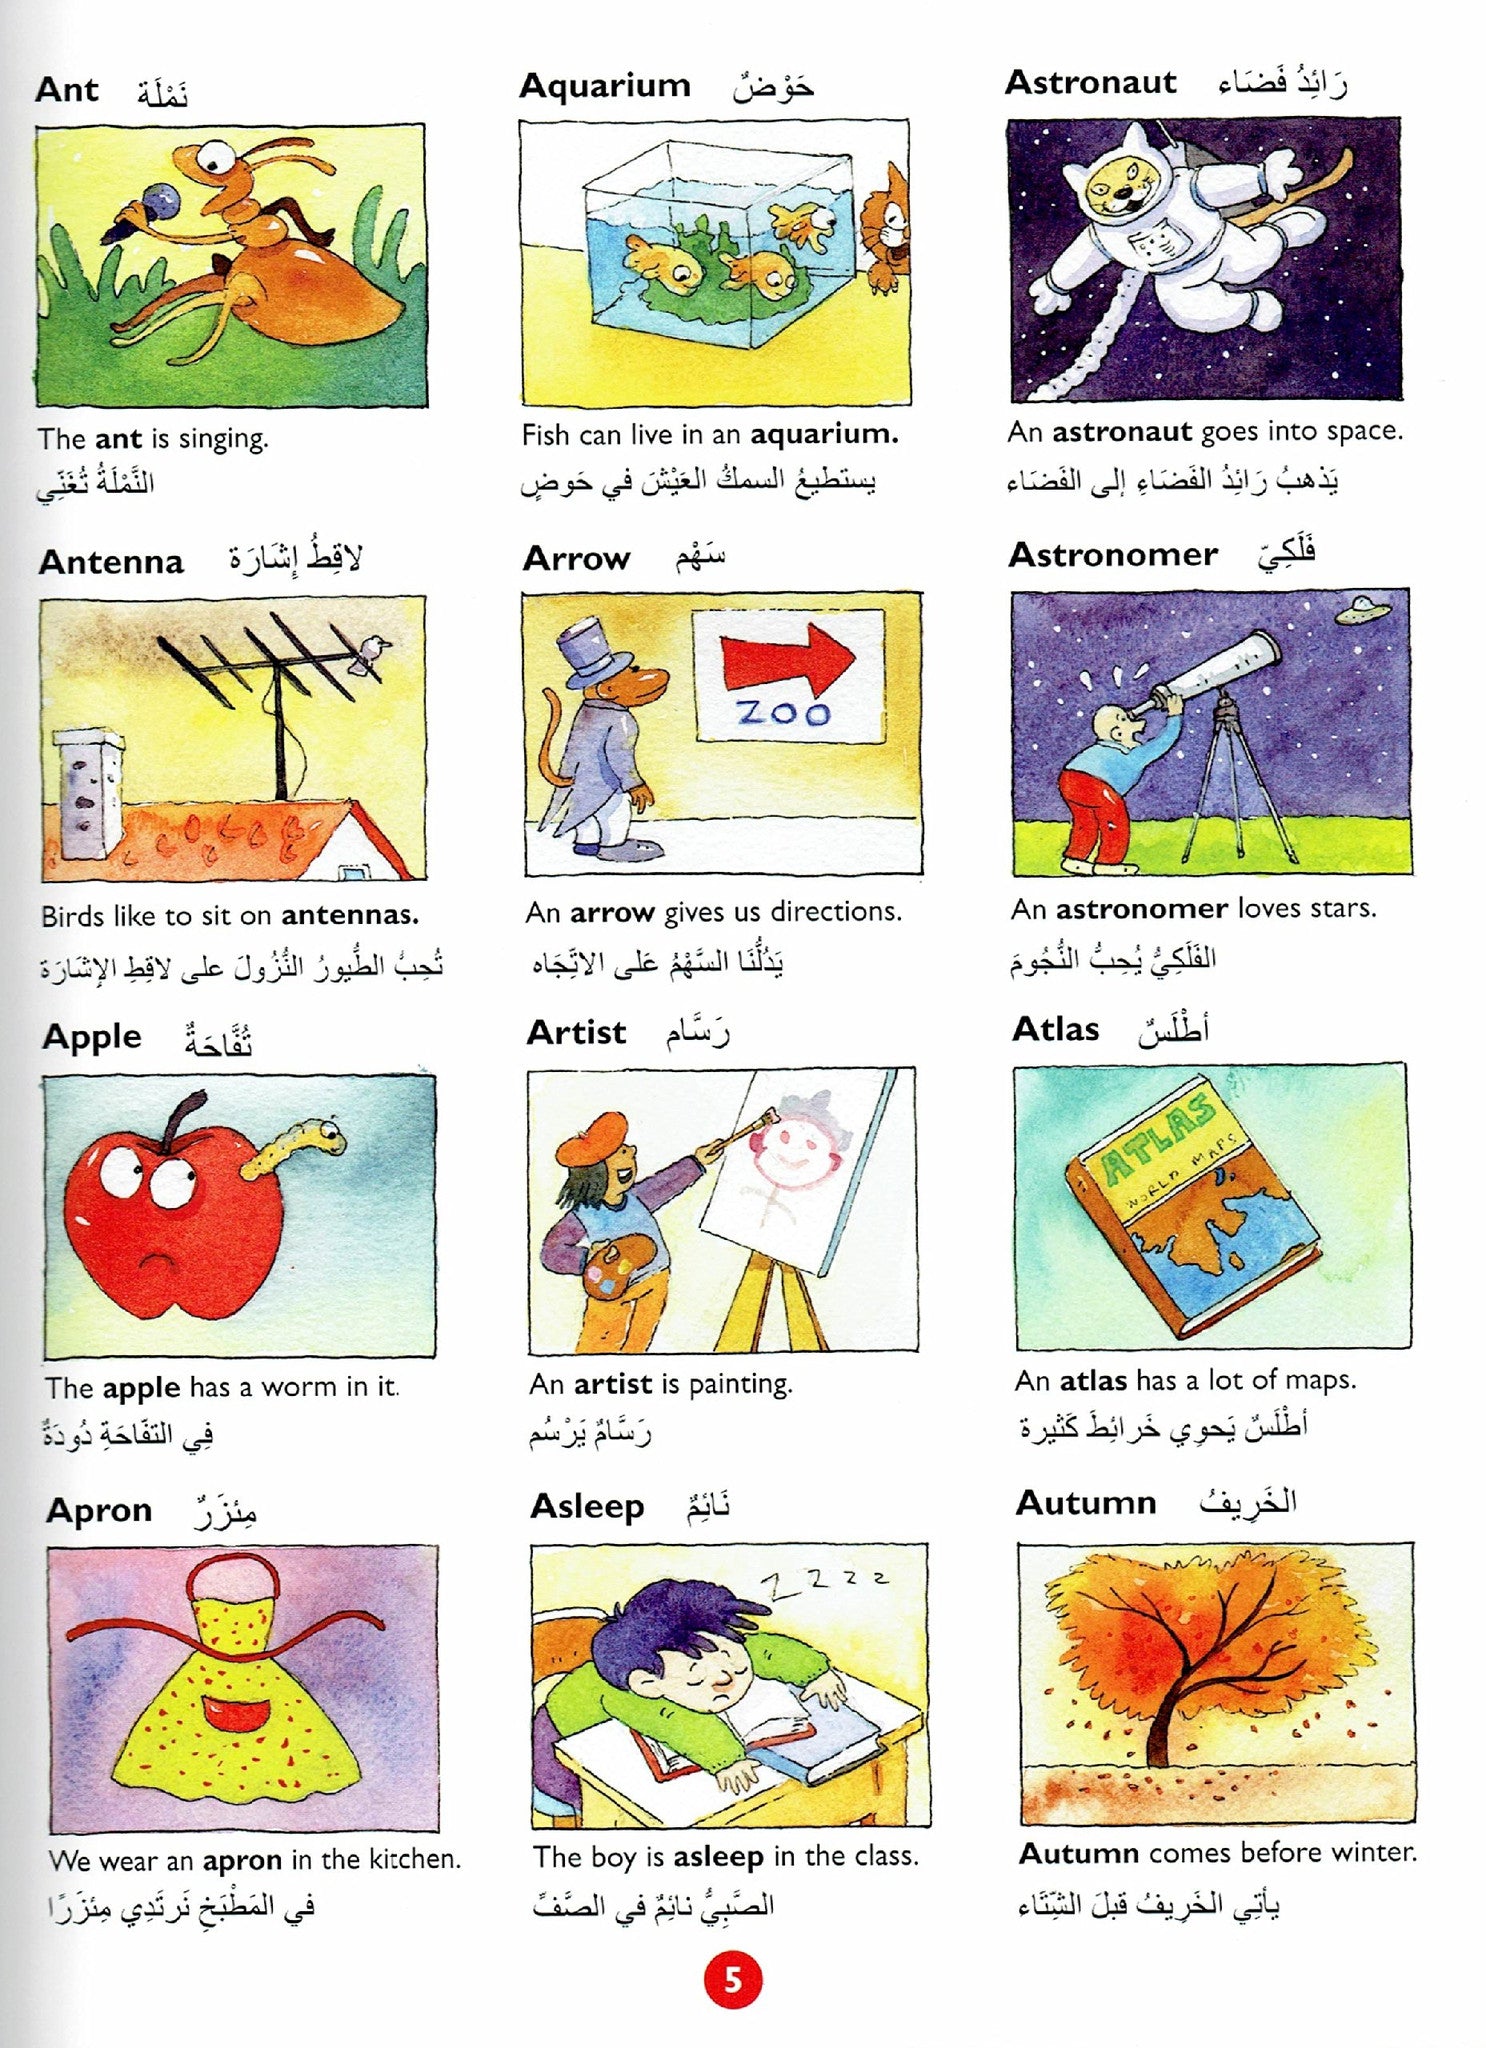 Arabic Picture Dictionary for Kids - Anafiya Gifts